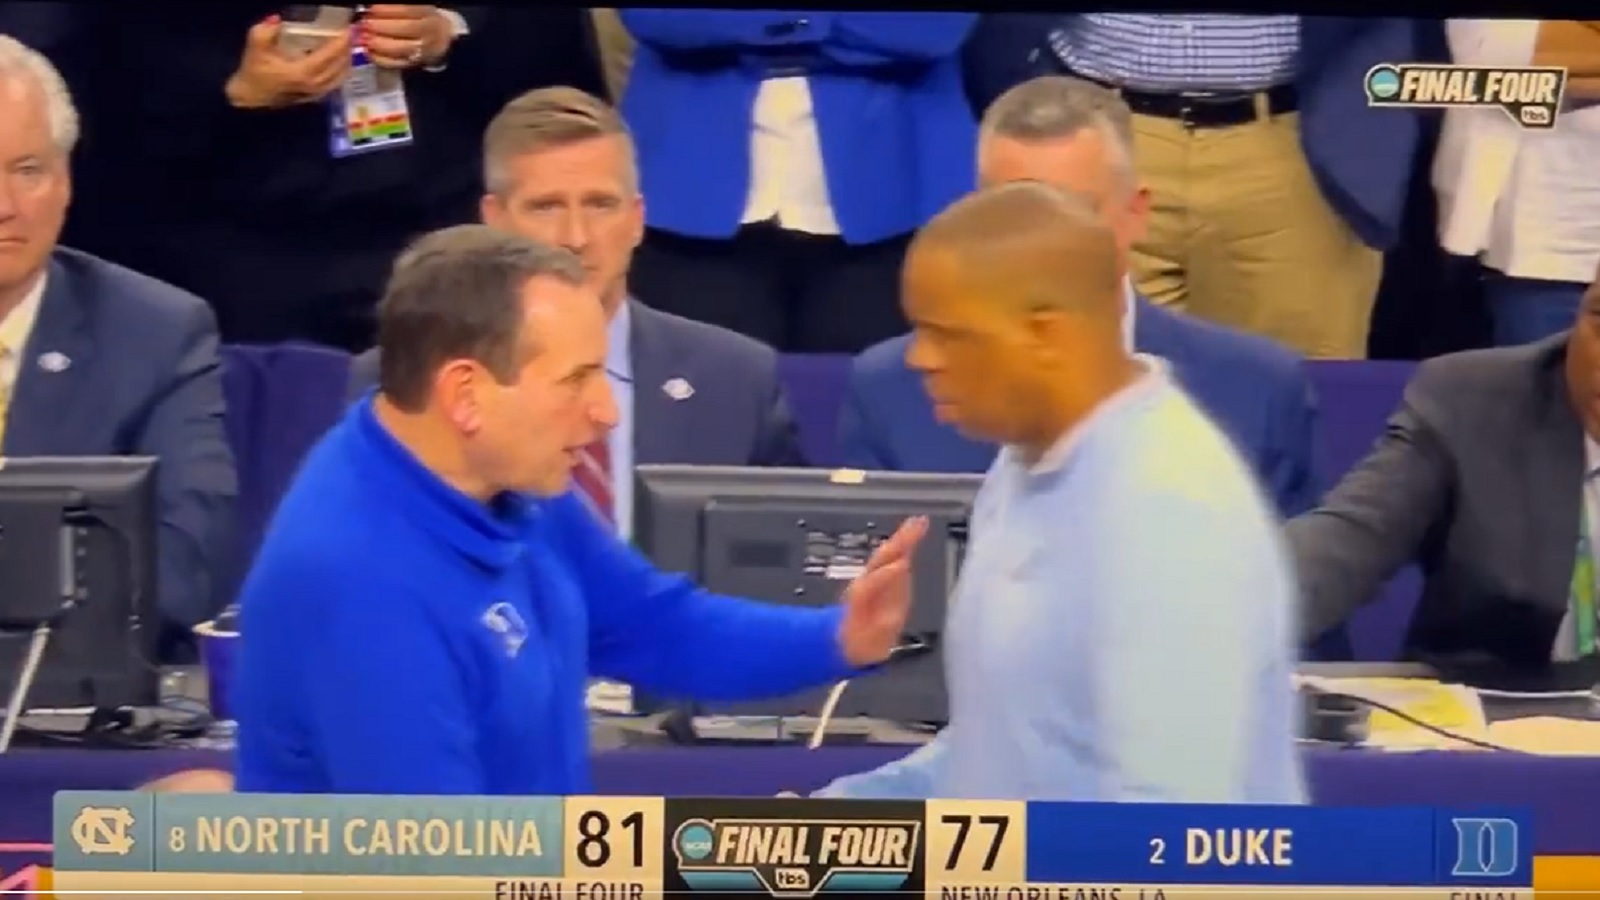 Coach K's final home game at Duke ends with a 94-81 loss : NPR